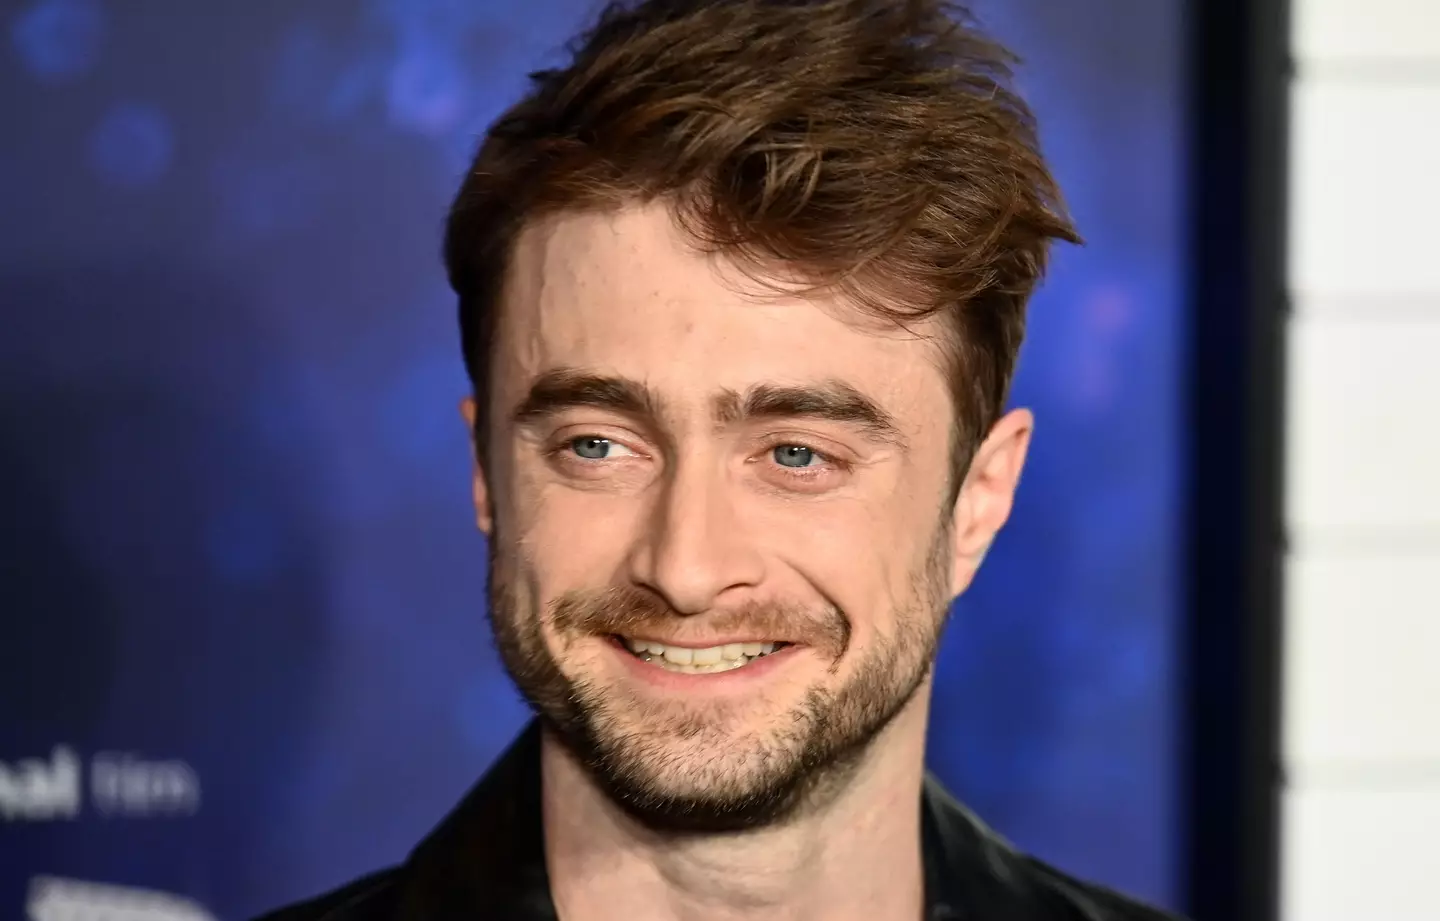 Daniel Radcliffe has revealed his first child is a boy.